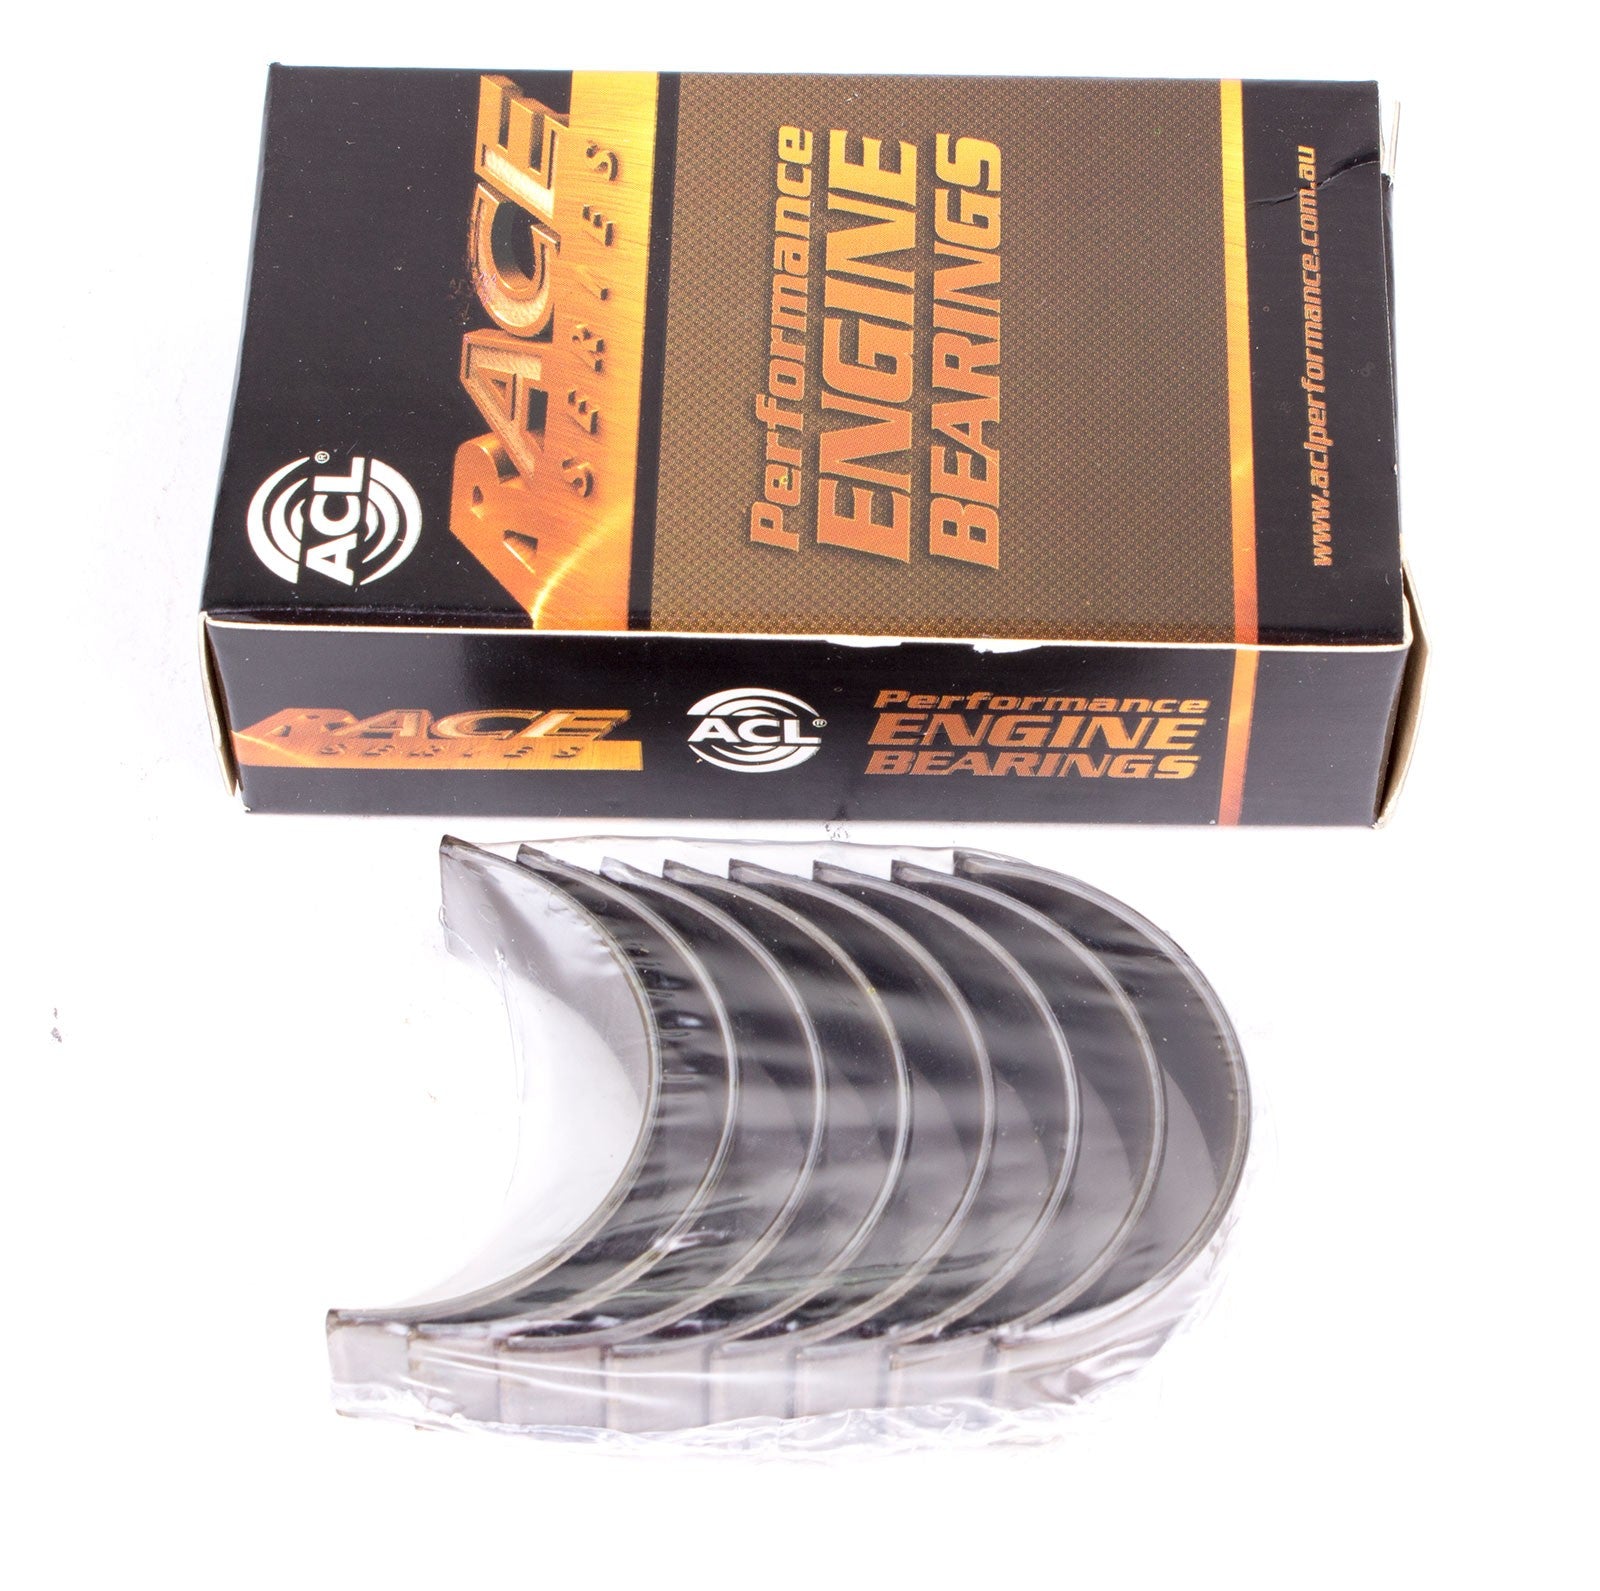 ACL 4M8599H-.25 Main bearing set (ACL Race Series) Photo-0 